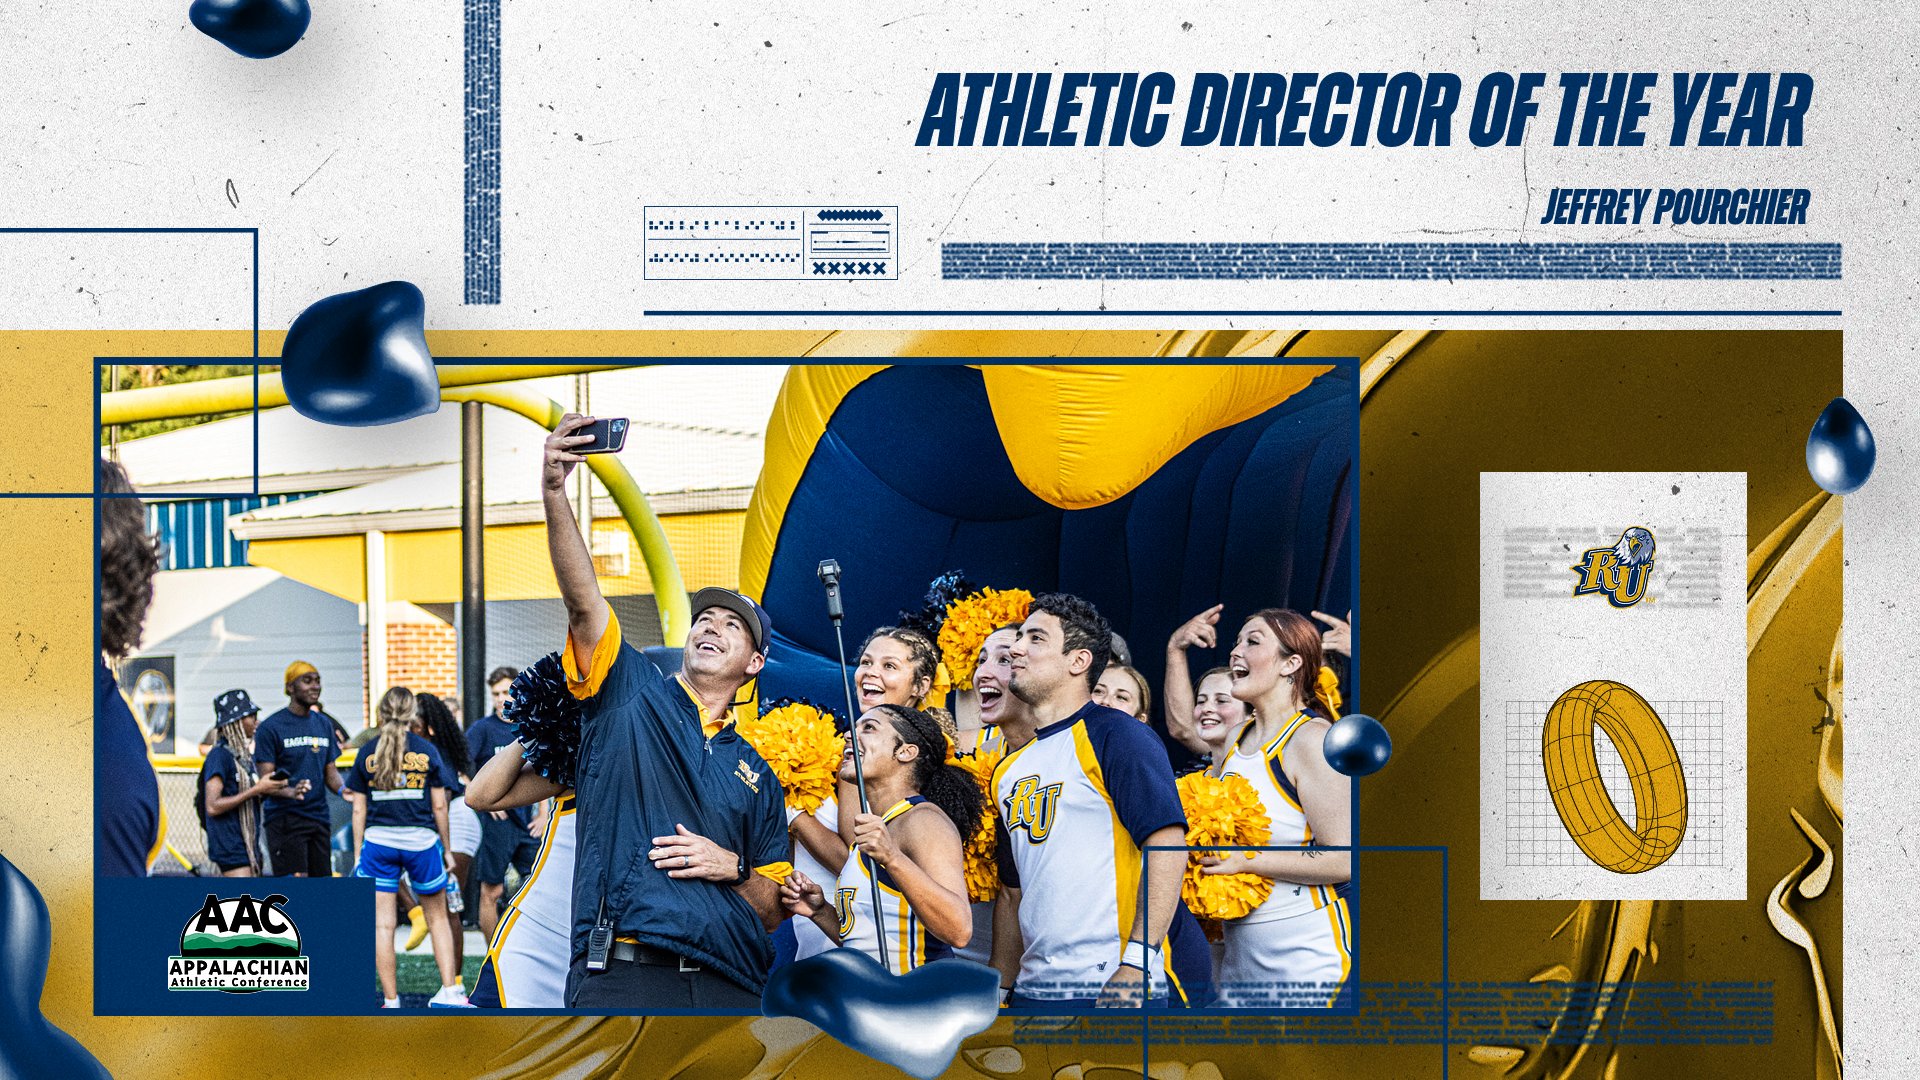 Reinhardt's Pourchier Named AAC Athletic Director of the Year